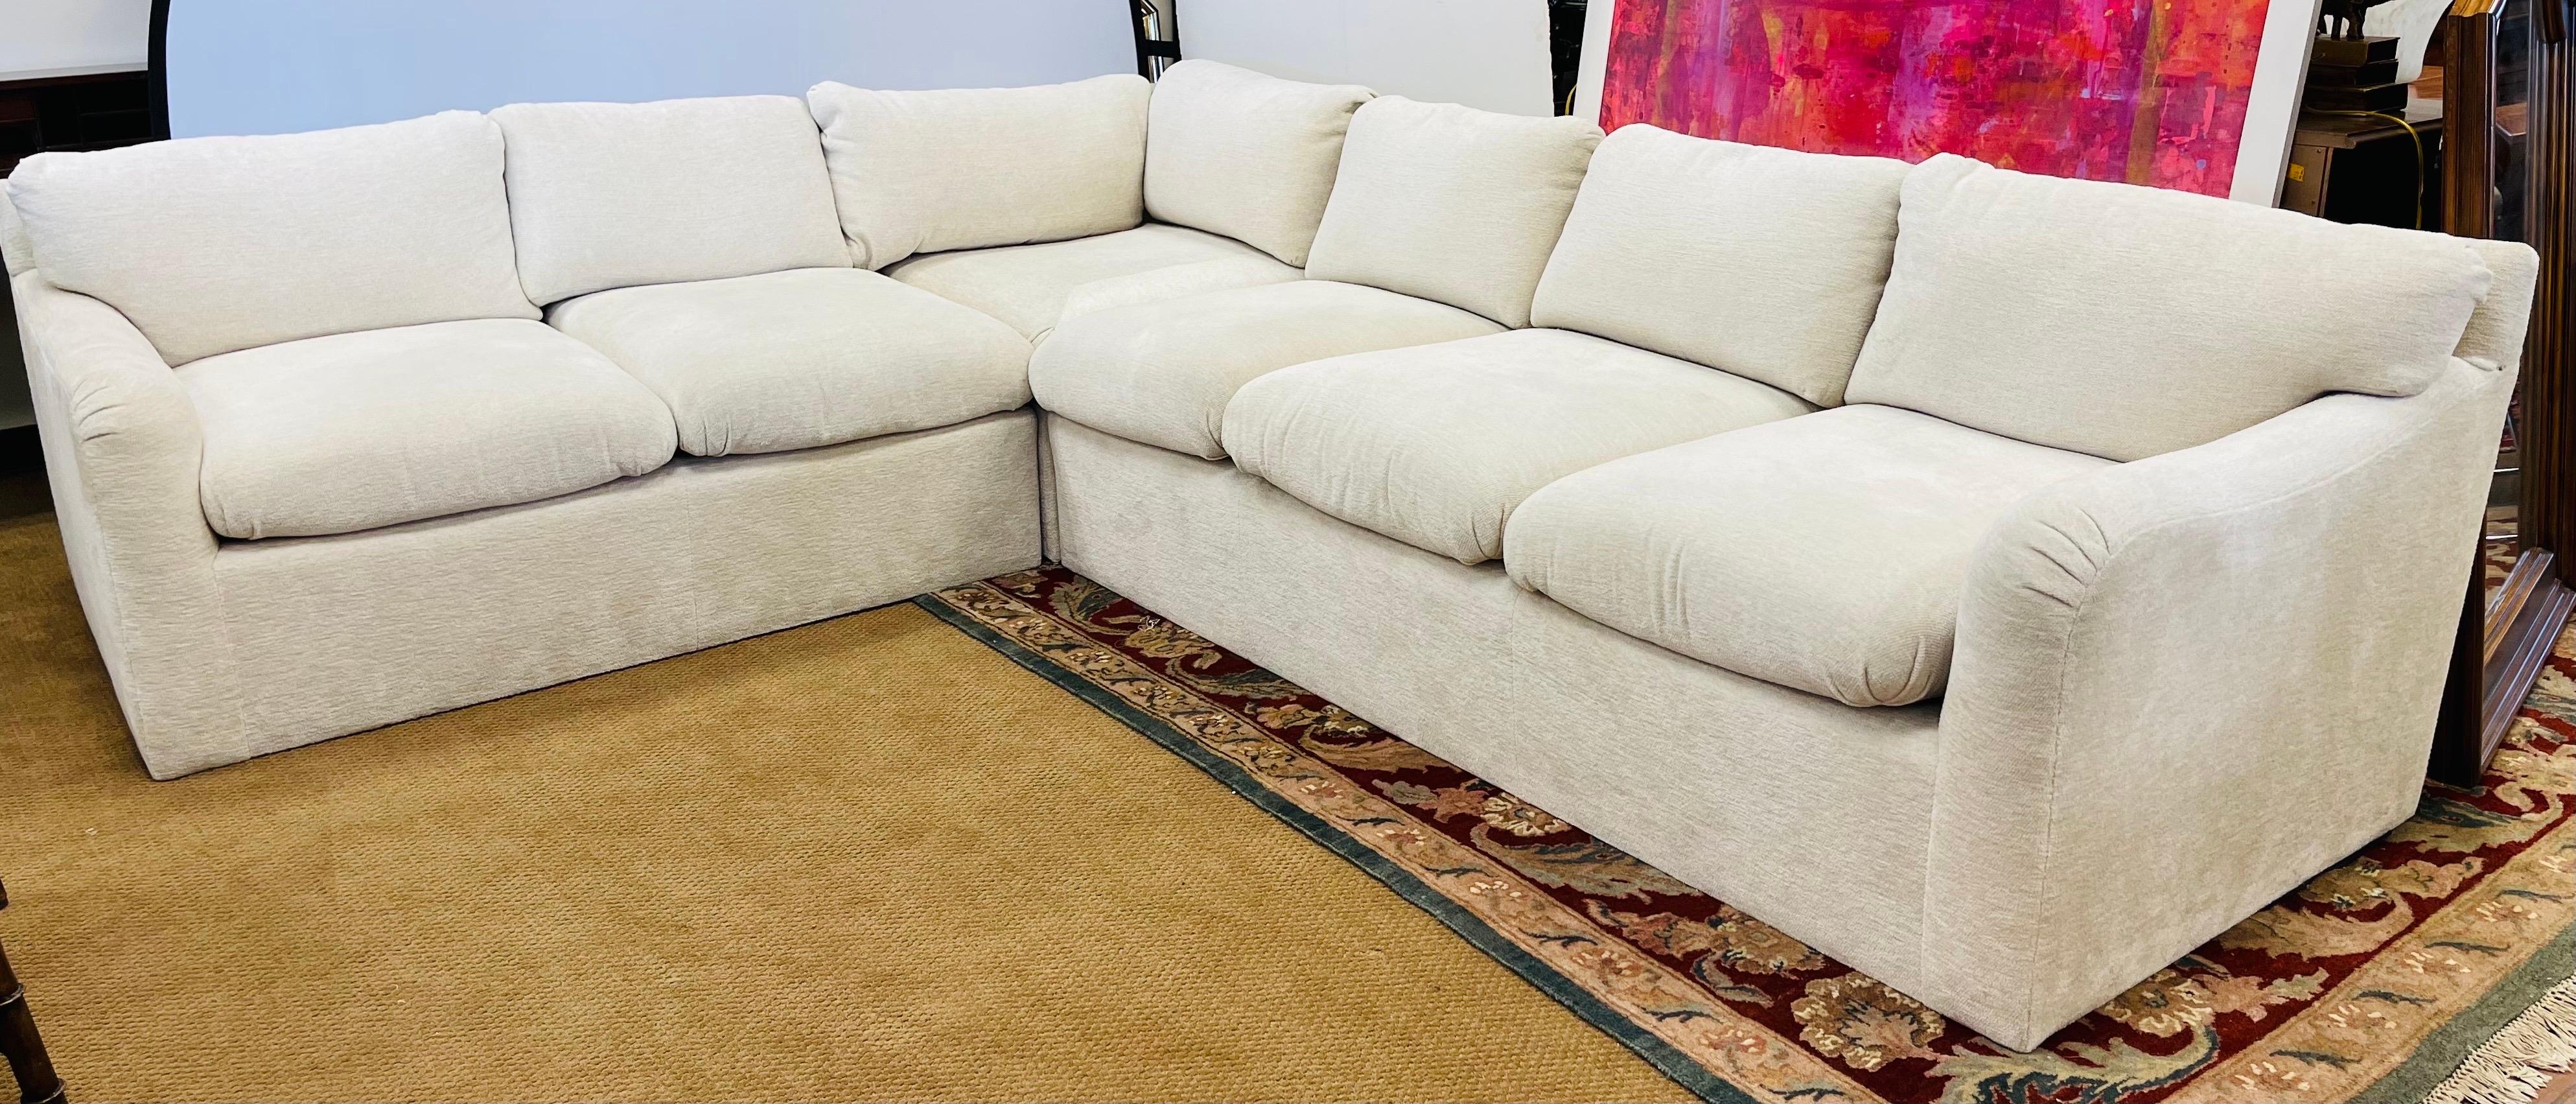 

This J. Robert Scott custom sectional sofa is a masterpiece of mid-century modern design. With seating capacity for more than six people, this oatmeal-colored chenille upholstered sofa is a perfect addition to any New York-themed home. Measuring